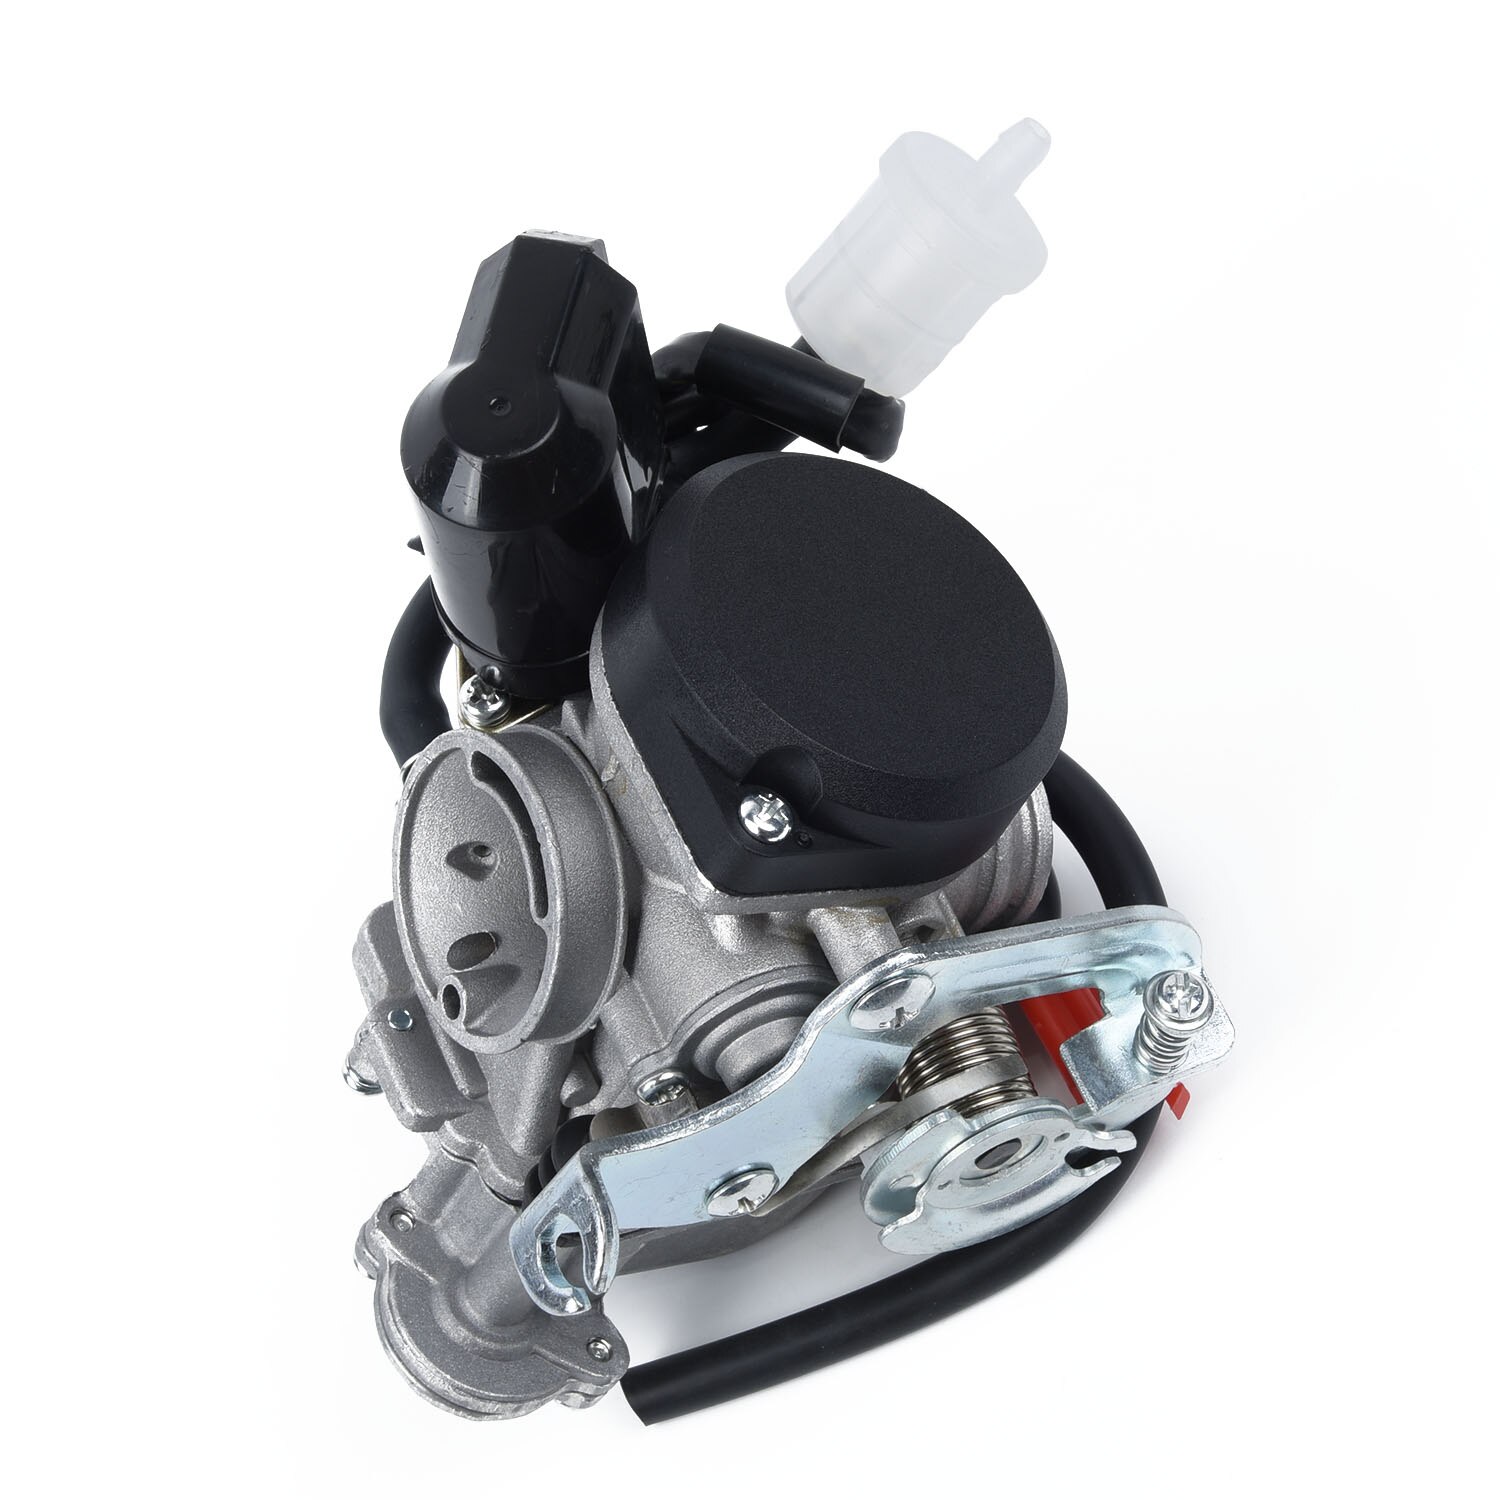 PD18J Carburateur Vervanging Voor GY6 50cc 139QMB 139QMA Scooter Bromfiets Quads Universele